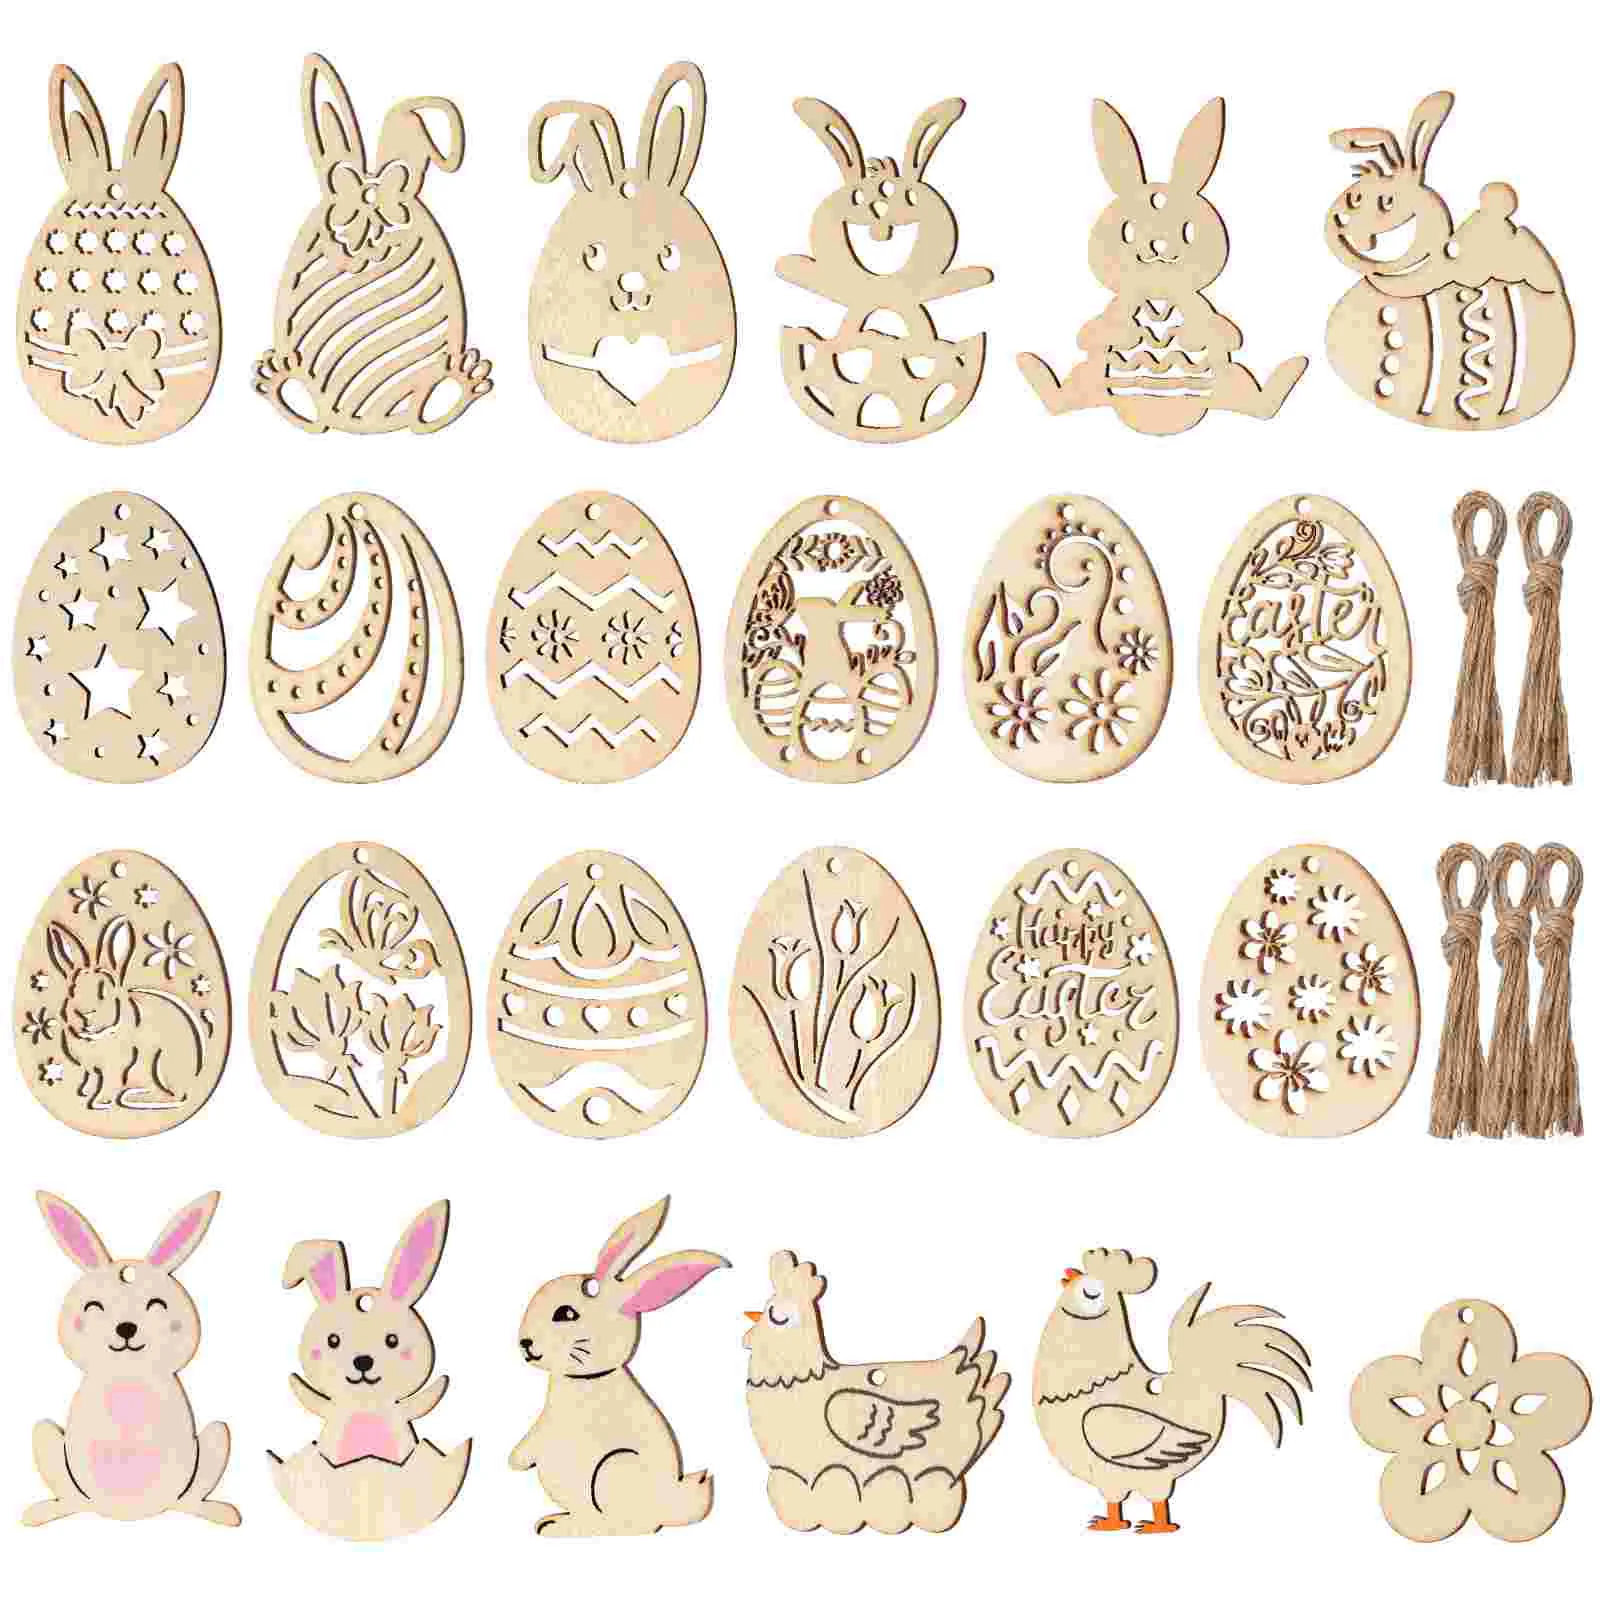 

Easter Wood Wooden Ornaments Slices Crafts Hanging Cutouts Tags Diy Egg Bunny Unfinished Eggs Ornament Kids Embellishments Gift